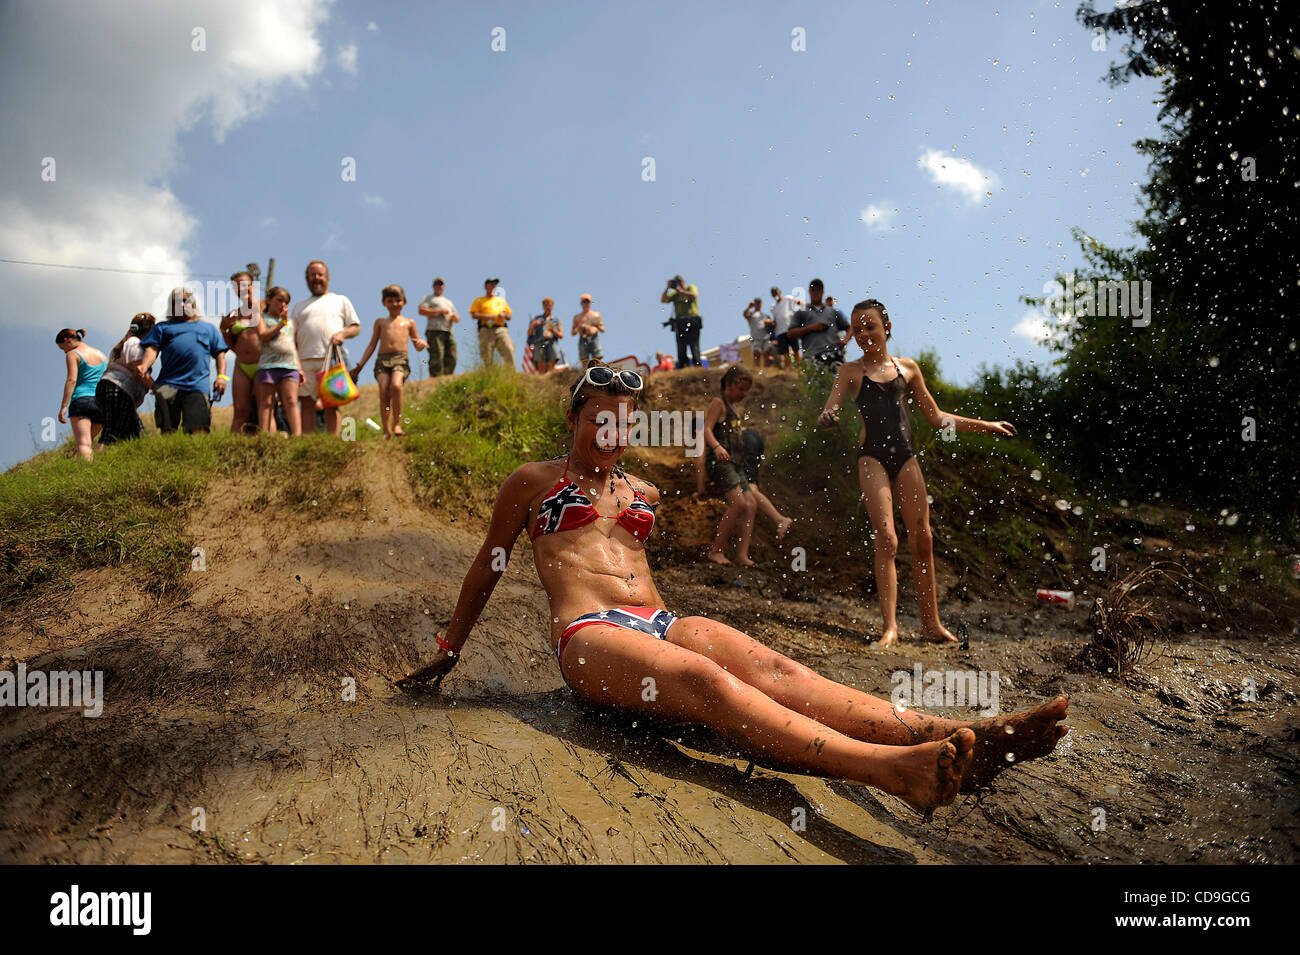 SATURDAY JULY 10, 2010 EAST DUBLIN, GEORGIA - A Redneck Games participant slides down a muddy hill into the river at Buckeye Park during the Redneck Games in East Dublin, Georgia. The games started in 1996 as spoof on the Olympics which were being held in Atlanta, Georgia at the time. participants c Stock Photo